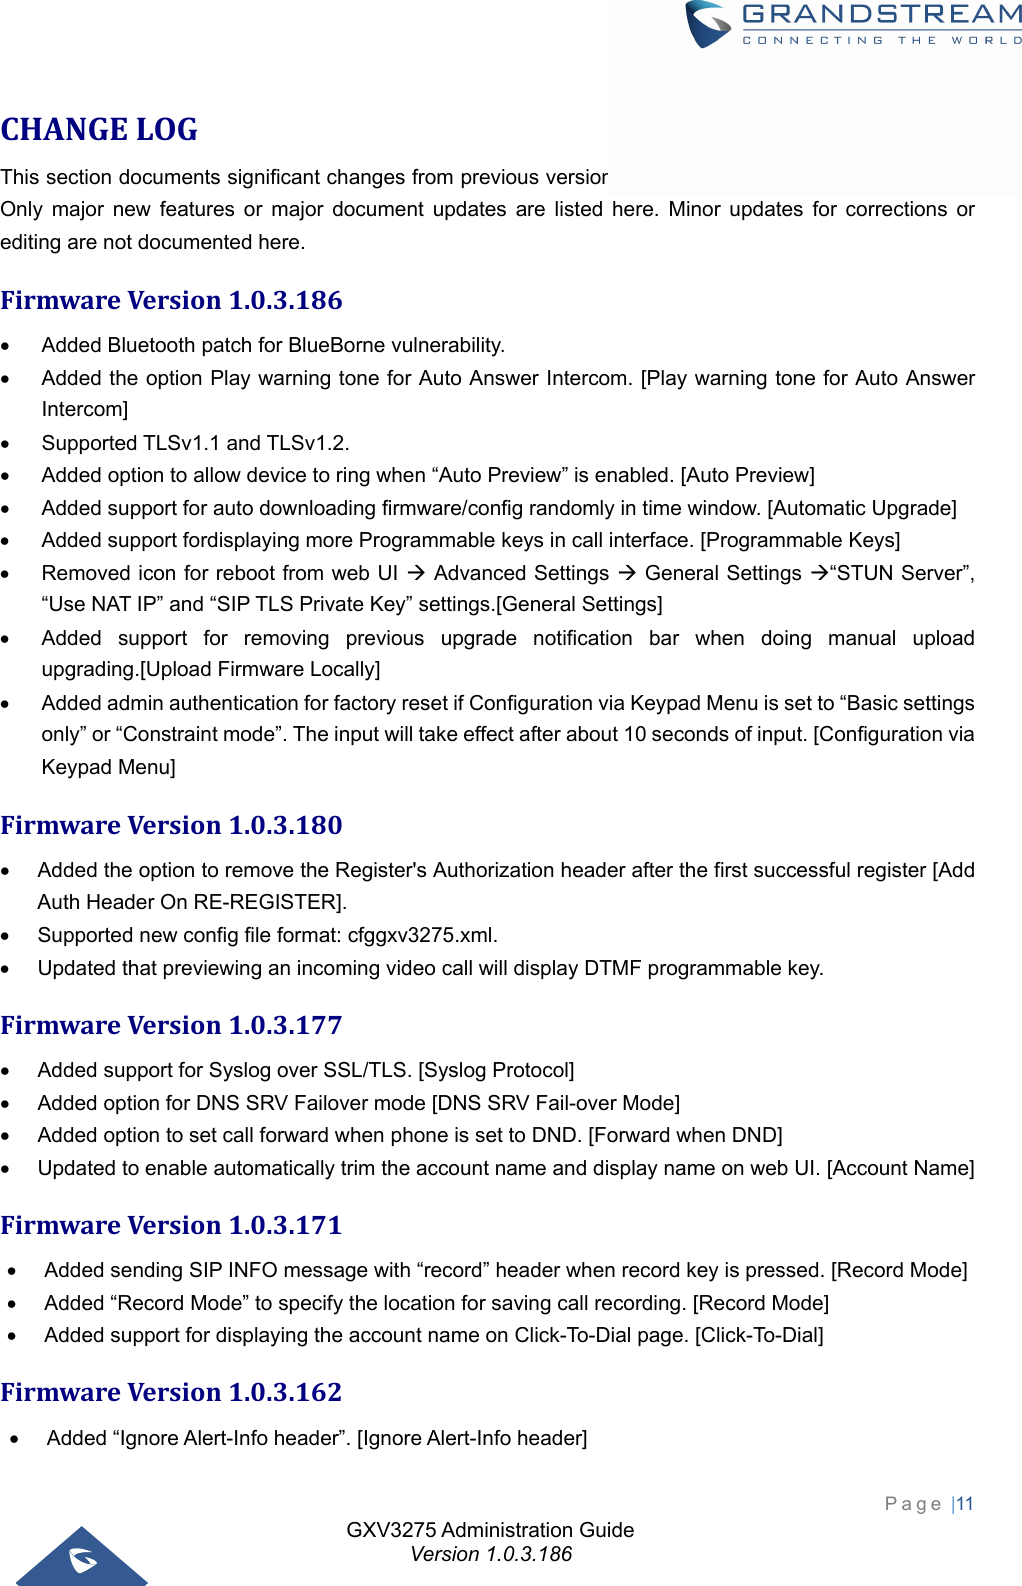 GXV3275 Administration Guide Version 1.0.3.186 Page |11  CHANGELOGThis section documents significant changes from previous versions of administration guide for GXV3275. Only major new features or major document updates are listed here. Minor updates for corrections or editing are not documented here. FirmwareVersion1.0.3.186  Added Bluetooth patch for BlueBorne vulnerability.   Added the option Play warning tone for Auto Answer Intercom. [Play warning tone for Auto Answer Intercom]   Supported TLSv1.1 and TLSv1.2.   Added option to allow device to ring when “Auto Preview” is enabled. [Auto Preview]   Added support for auto downloading firmware/config randomly in time window. [Automatic Upgrade]   Added support fordisplaying more Programmable keys in call interface. [Programmable Keys]   Removed icon for reboot from web UI  Advanced Settings  General Settings “STUN Server”, “Use NAT IP” and “SIP TLS Private Key” settings.[General Settings]   Added support for removing previous upgrade notification bar when doing manual upload upgrading.[Upload Firmware Locally]   Added admin authentication for factory reset if Configuration via Keypad Menu is set to “Basic settings only” or “Constraint mode”. The input will take effect after about 10 seconds of input. [Configuration via Keypad Menu] FirmwareVersion1.0.3.180  Added the option to remove the Register&apos;s Authorization header after the first successful register [Add Auth Header On RE-REGISTER].   Supported new config file format: cfggxv3275.xml.   Updated that previewing an incoming video call will display DTMF programmable key. FirmwareVersion1.0.3.177  Added support for Syslog over SSL/TLS. [Syslog Protocol]   Added option for DNS SRV Failover mode [DNS SRV Fail-over Mode]   Added option to set call forward when phone is set to DND. [Forward when DND]   Updated to enable automatically trim the account name and display name on web UI. [Account Name] FirmwareVersion1.0.3.171  Added sending SIP INFO message with “record” header when record key is pressed. [Record Mode]   Added “Record Mode” to specify the location for saving call recording. [Record Mode]   Added support for displaying the account name on Click-To-Dial page. [Click-To-Dial] FirmwareVersion1.0.3.162  Added “Ignore Alert-Info header”. [Ignore Alert-Info header] 